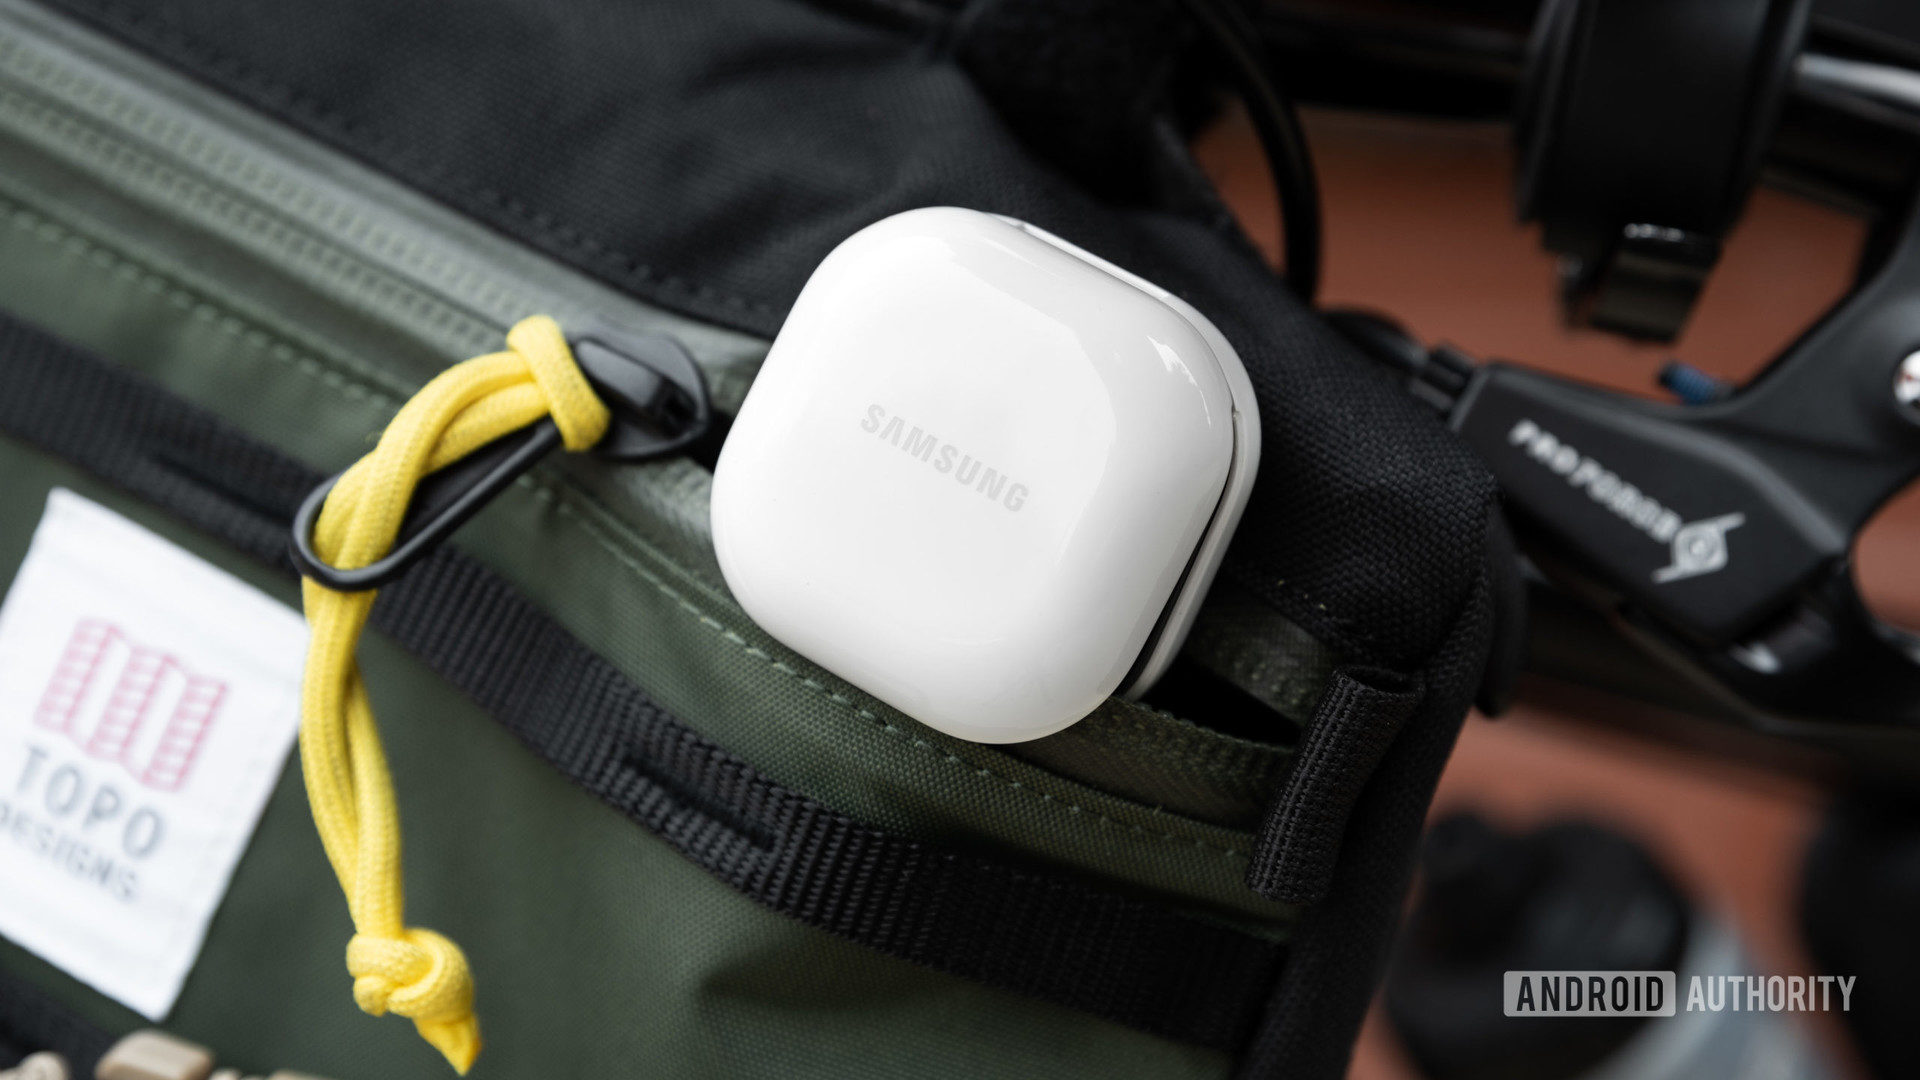 The Samsung Galaxy Buds 2 noise cancelling true wireless earbuds case partway in a zippered bag.